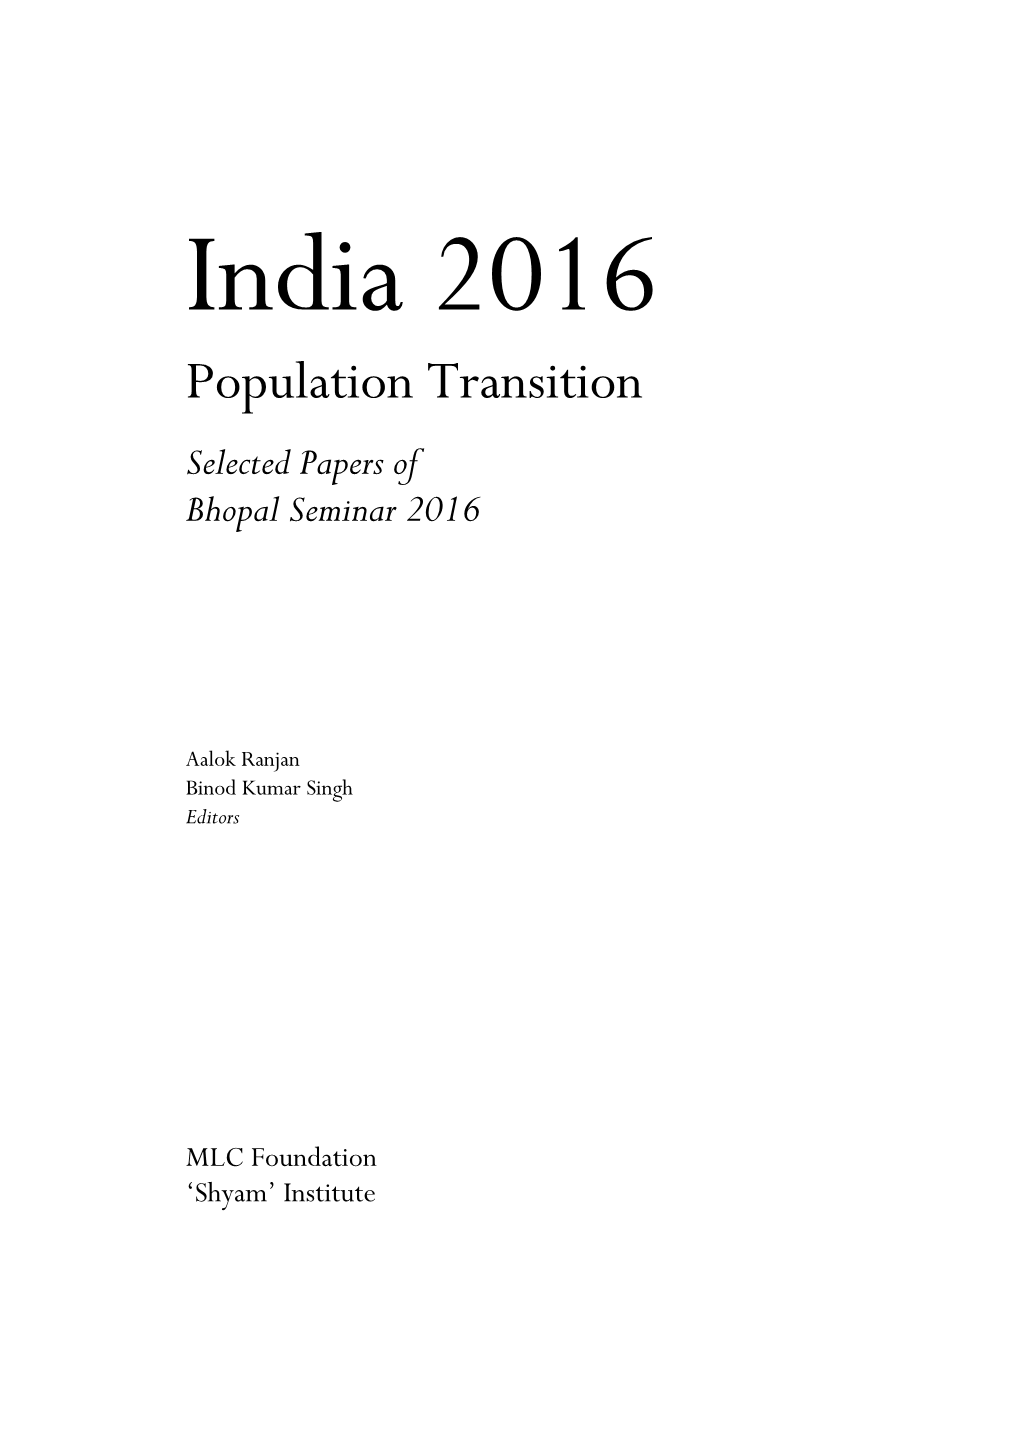 Population Transition Selected Papers of Bhopal Seminar 2016